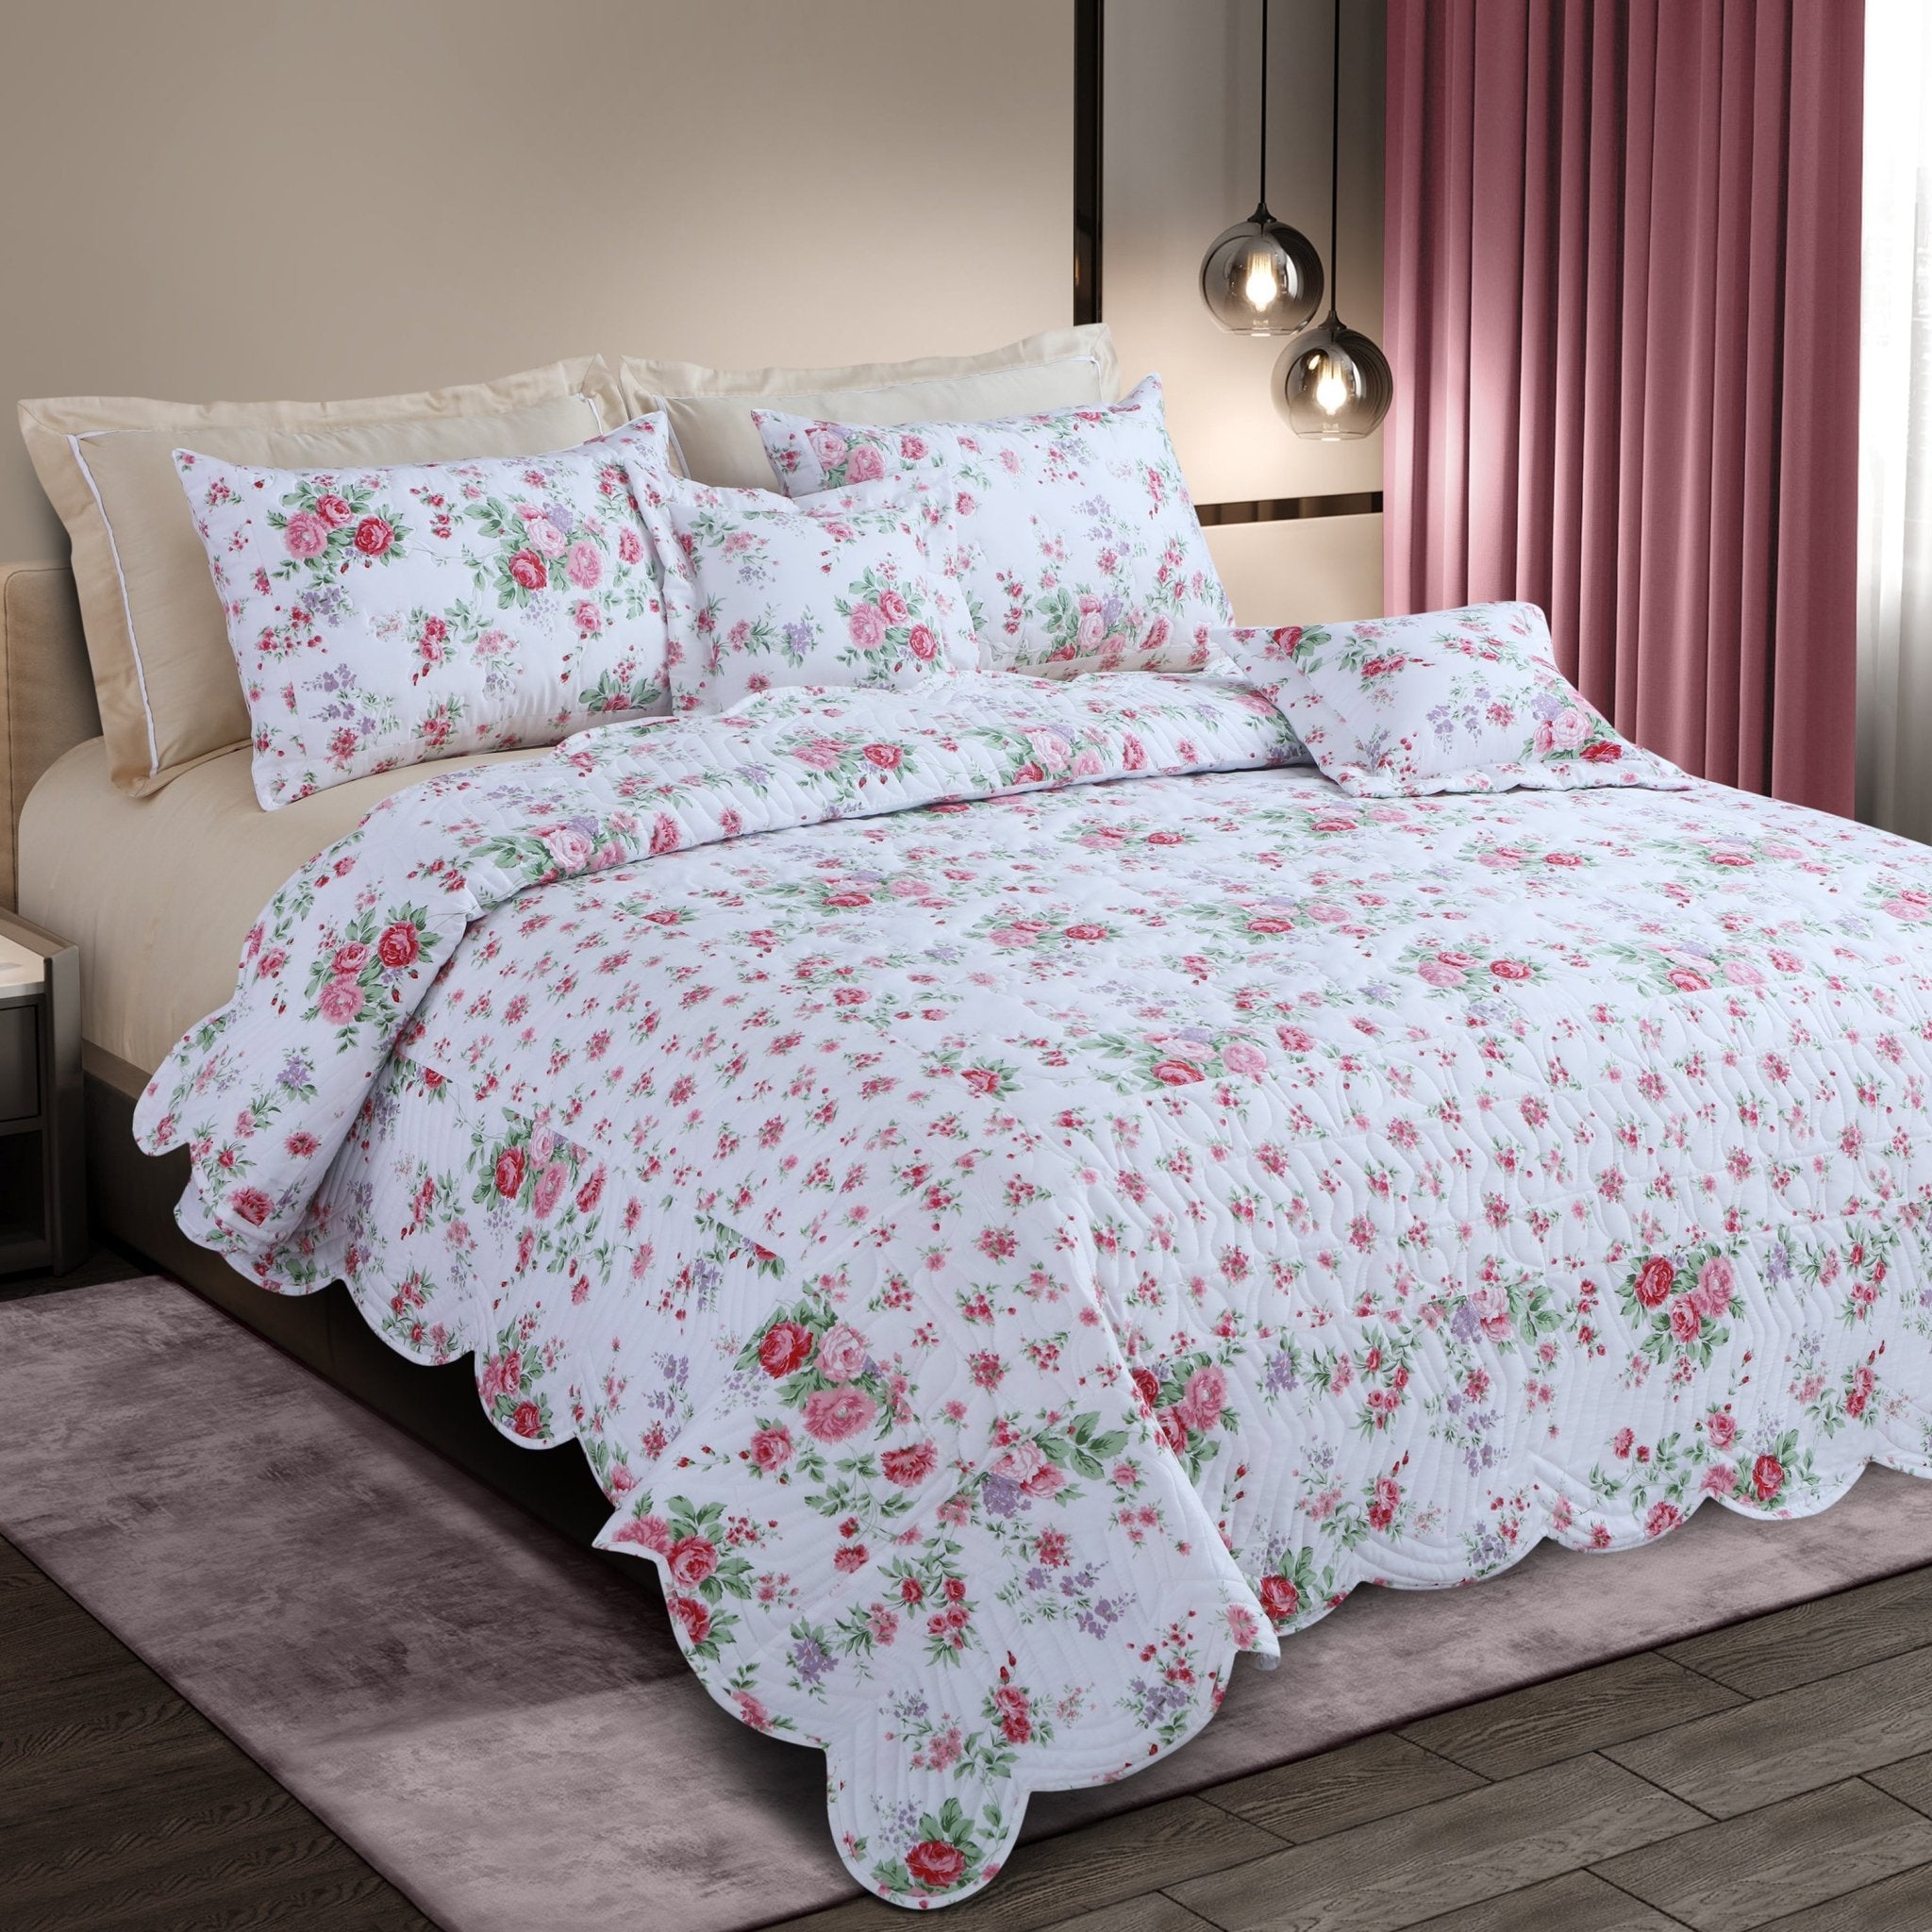 Malako Royale 100% Cotton White Floral King Size 5 Piece Quilted Bedspread Set - MALAKO